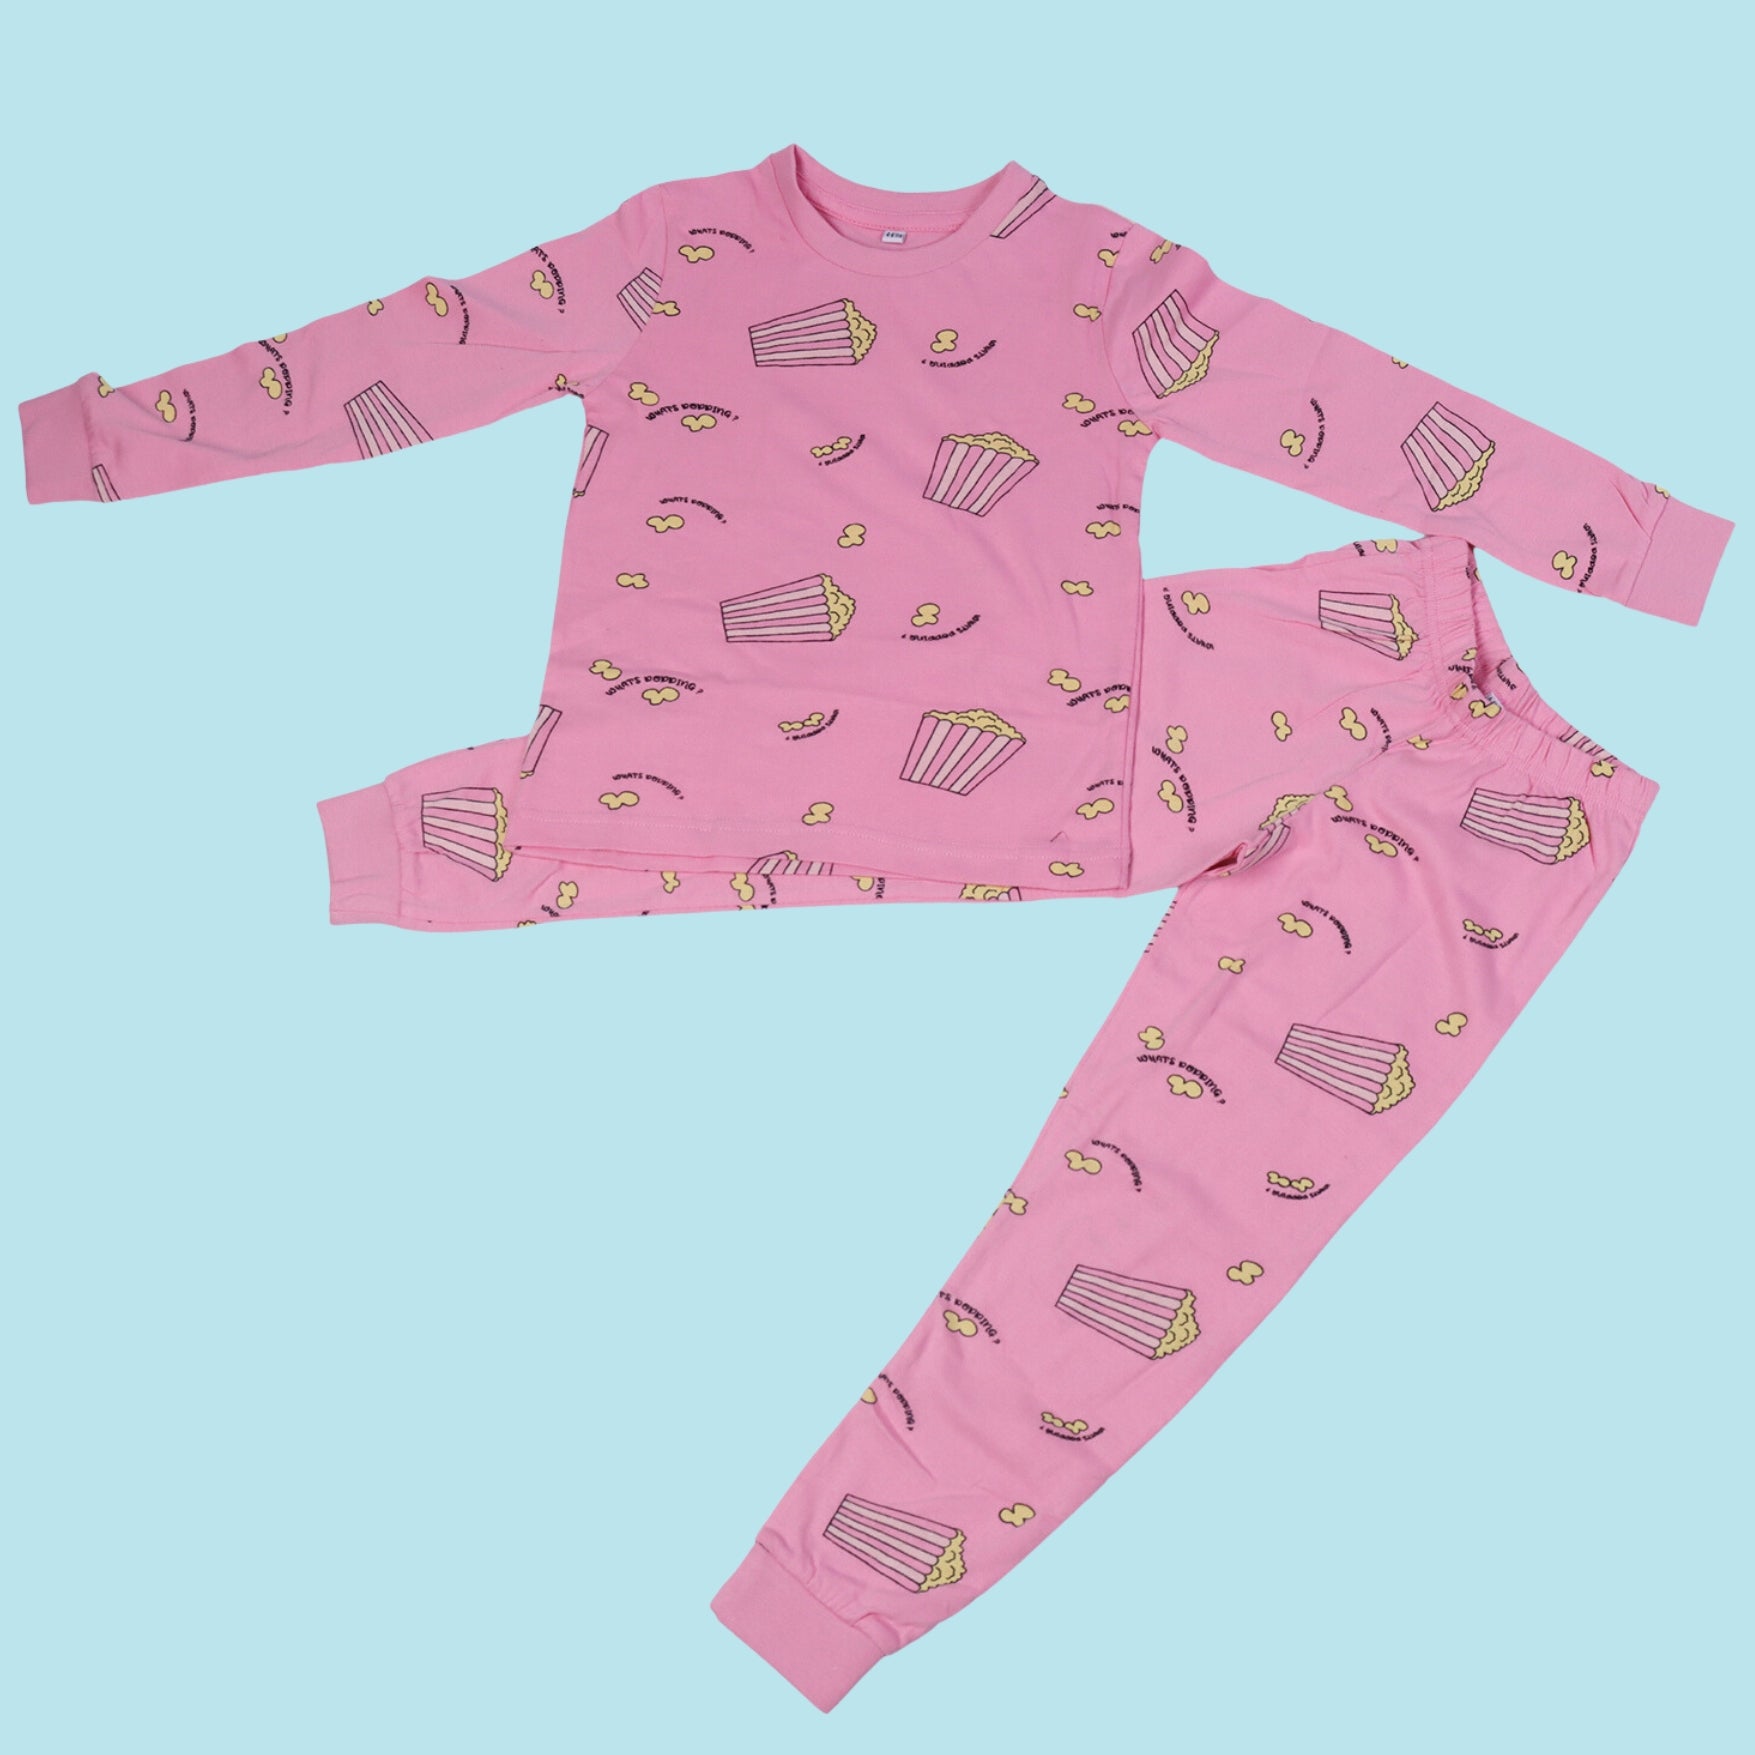 Full Sleeve Night Suit For Girl In Pink Colour 